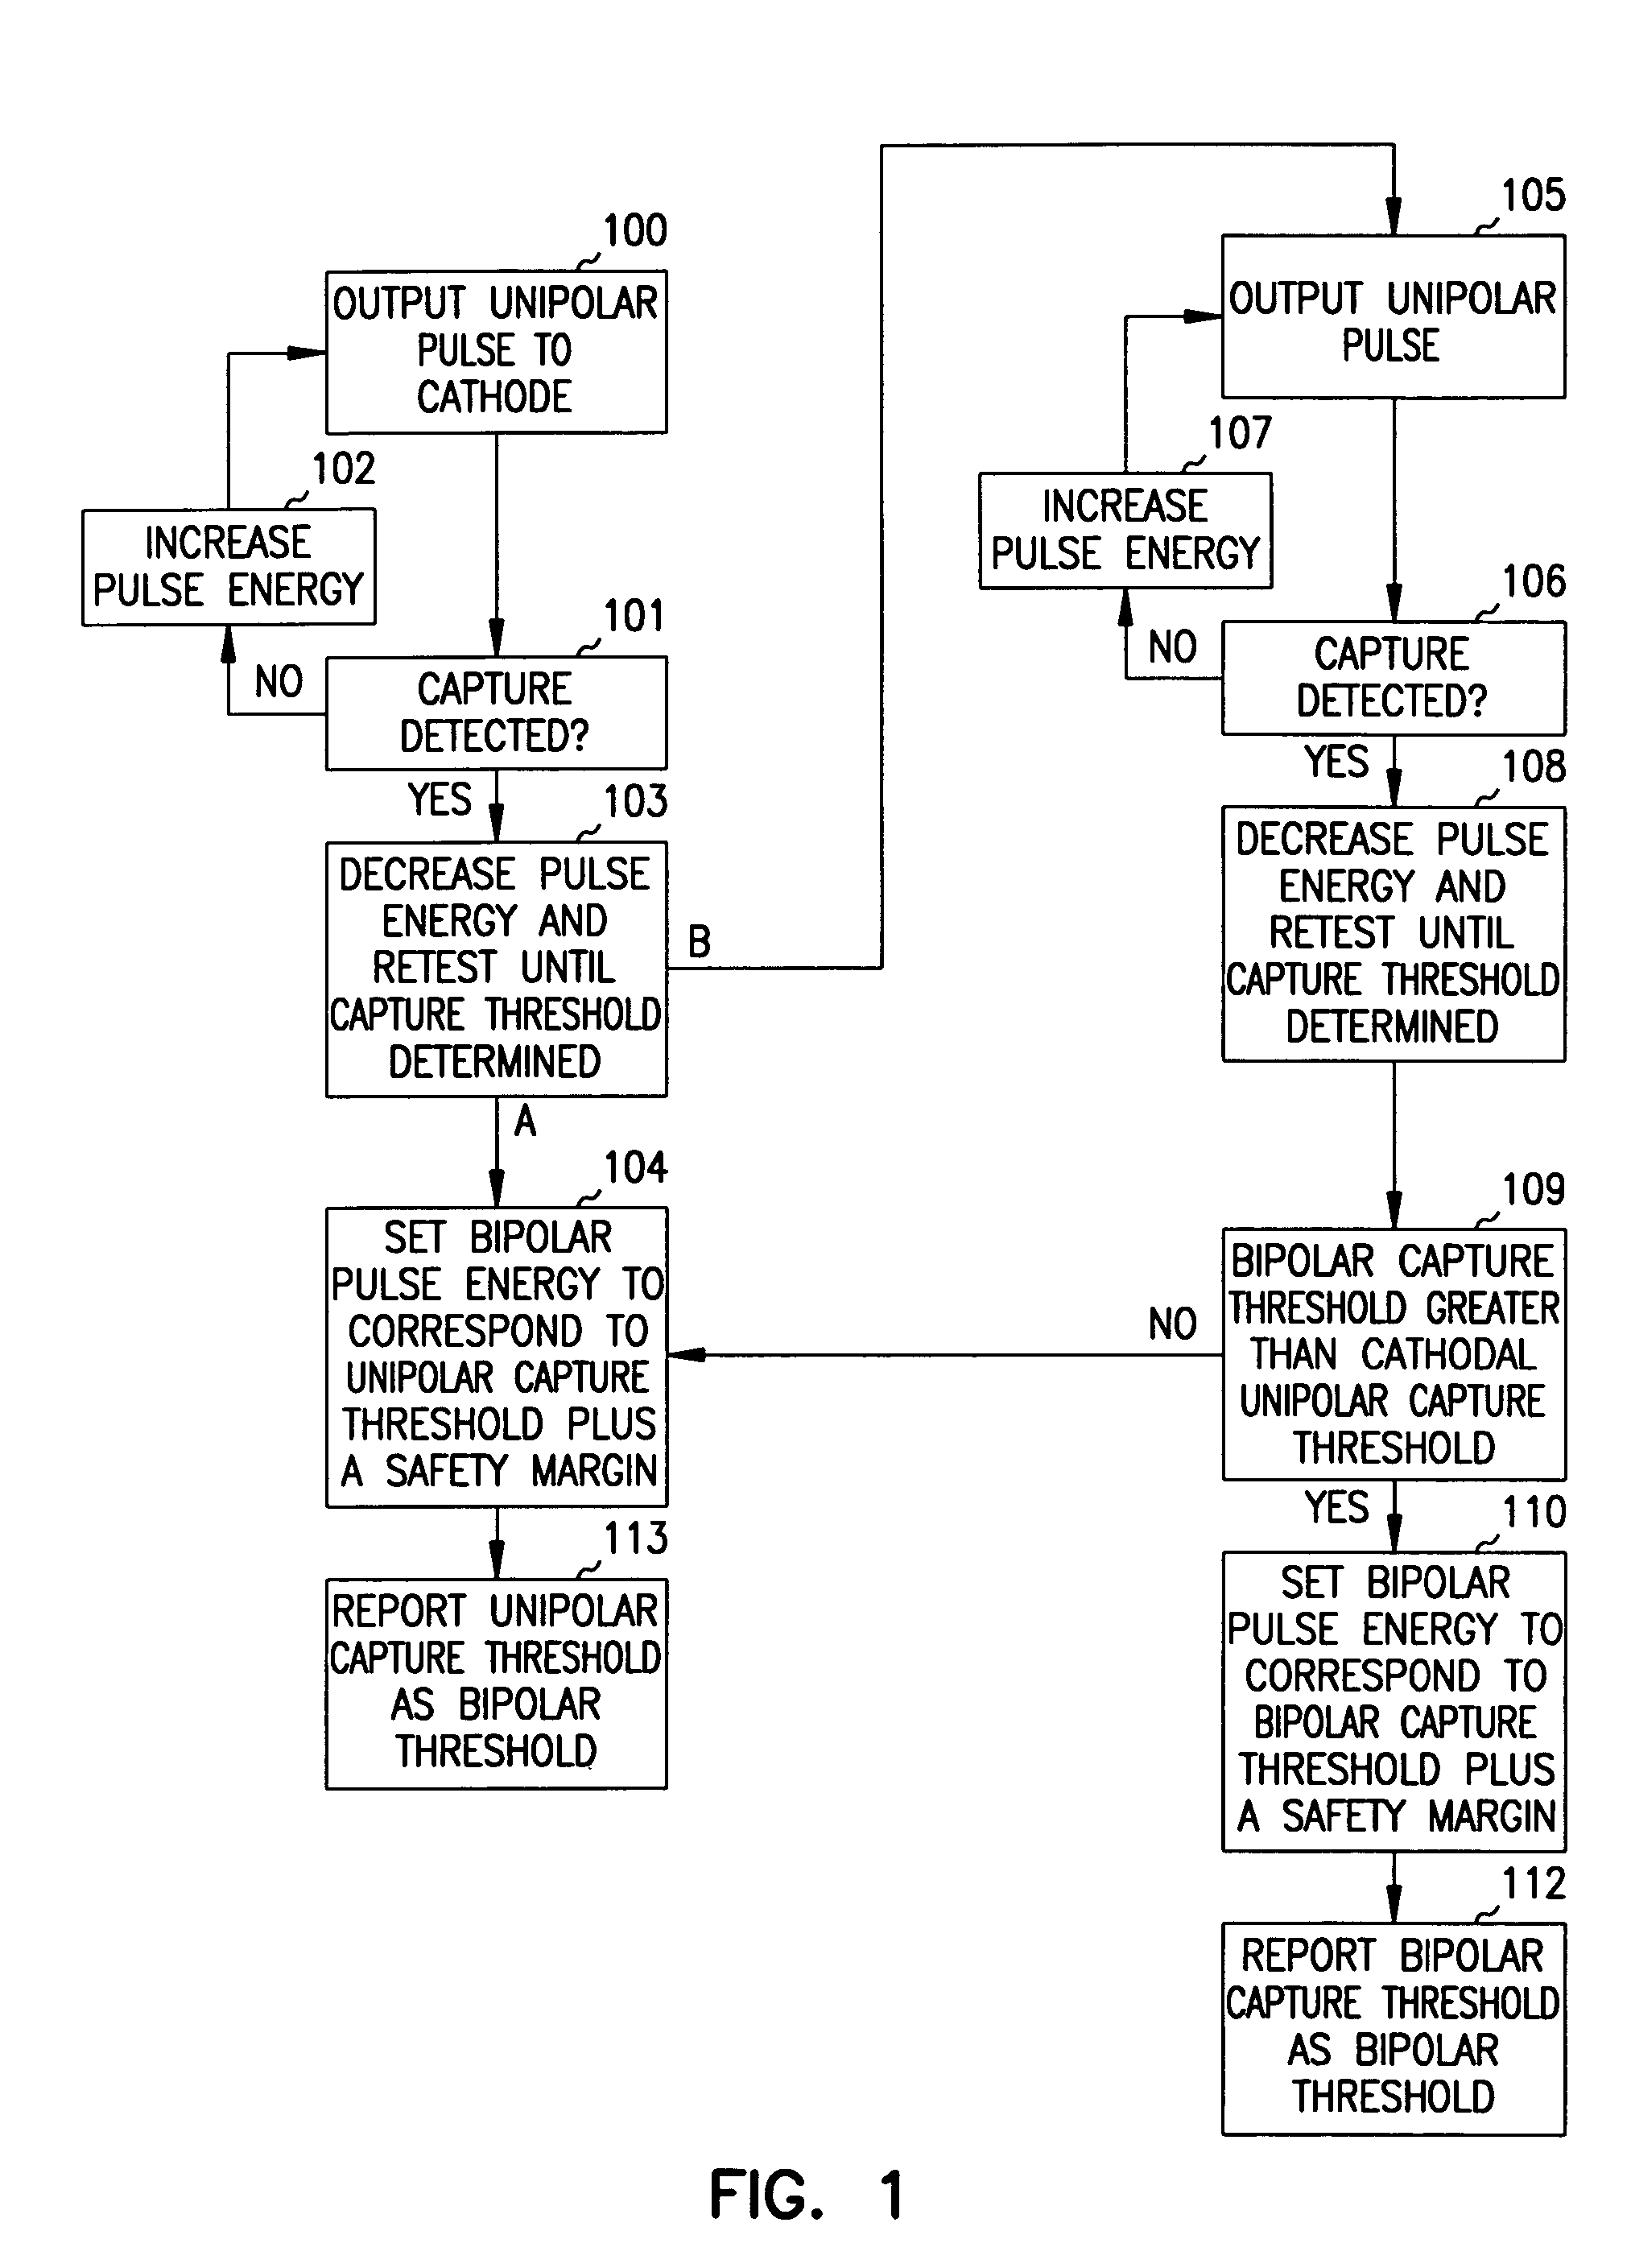 Apparatus and method for testing and adjusting a bipolar stimulation configuration